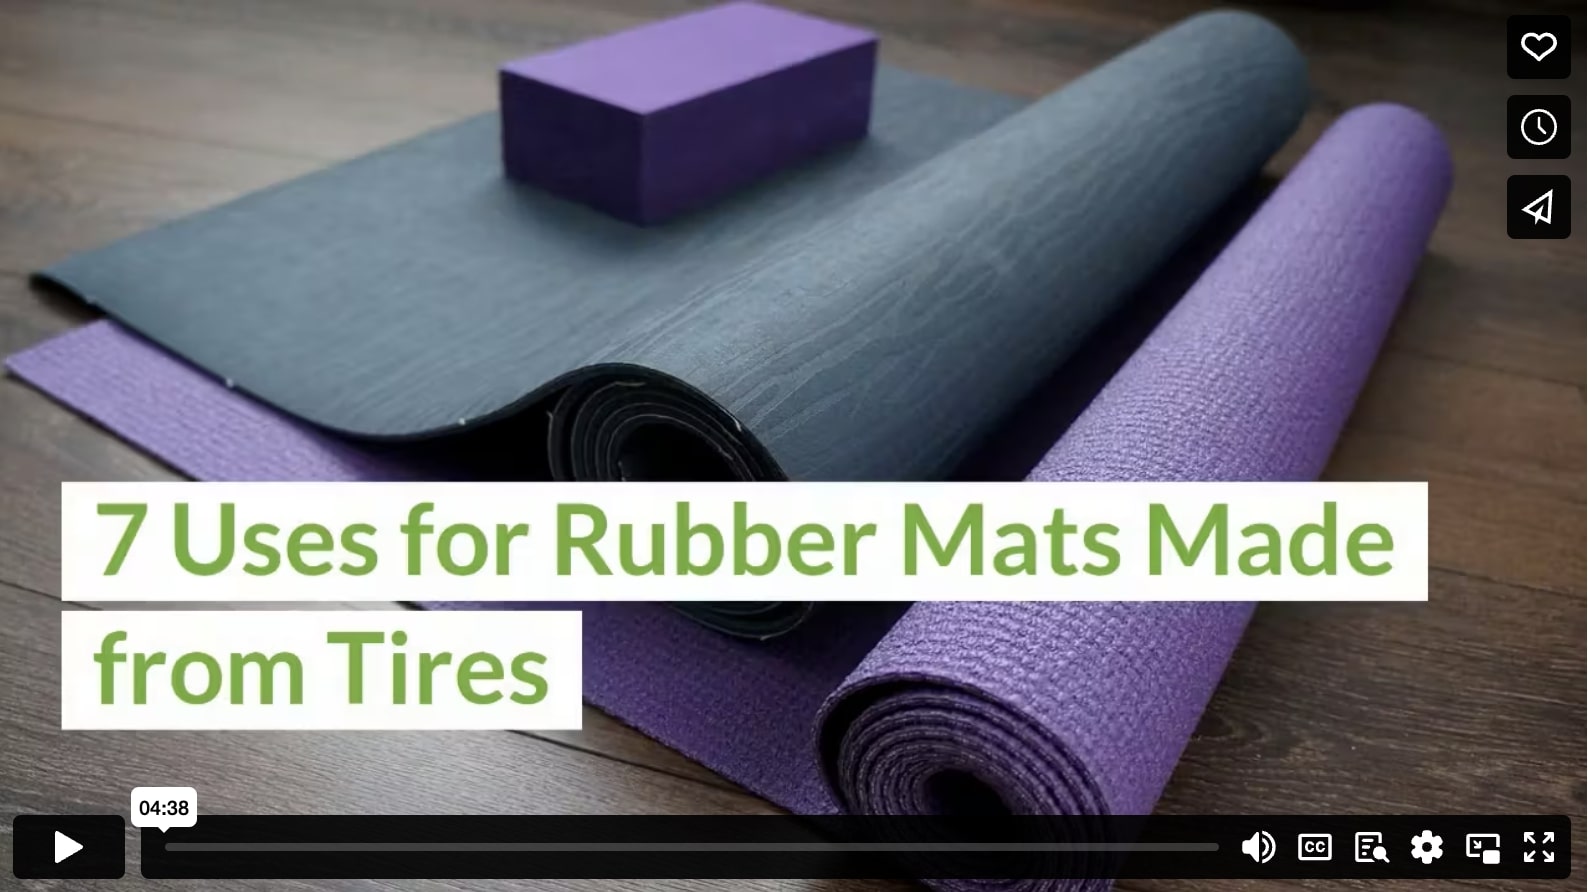 7 Uses for Rubber Mats Made from Tires